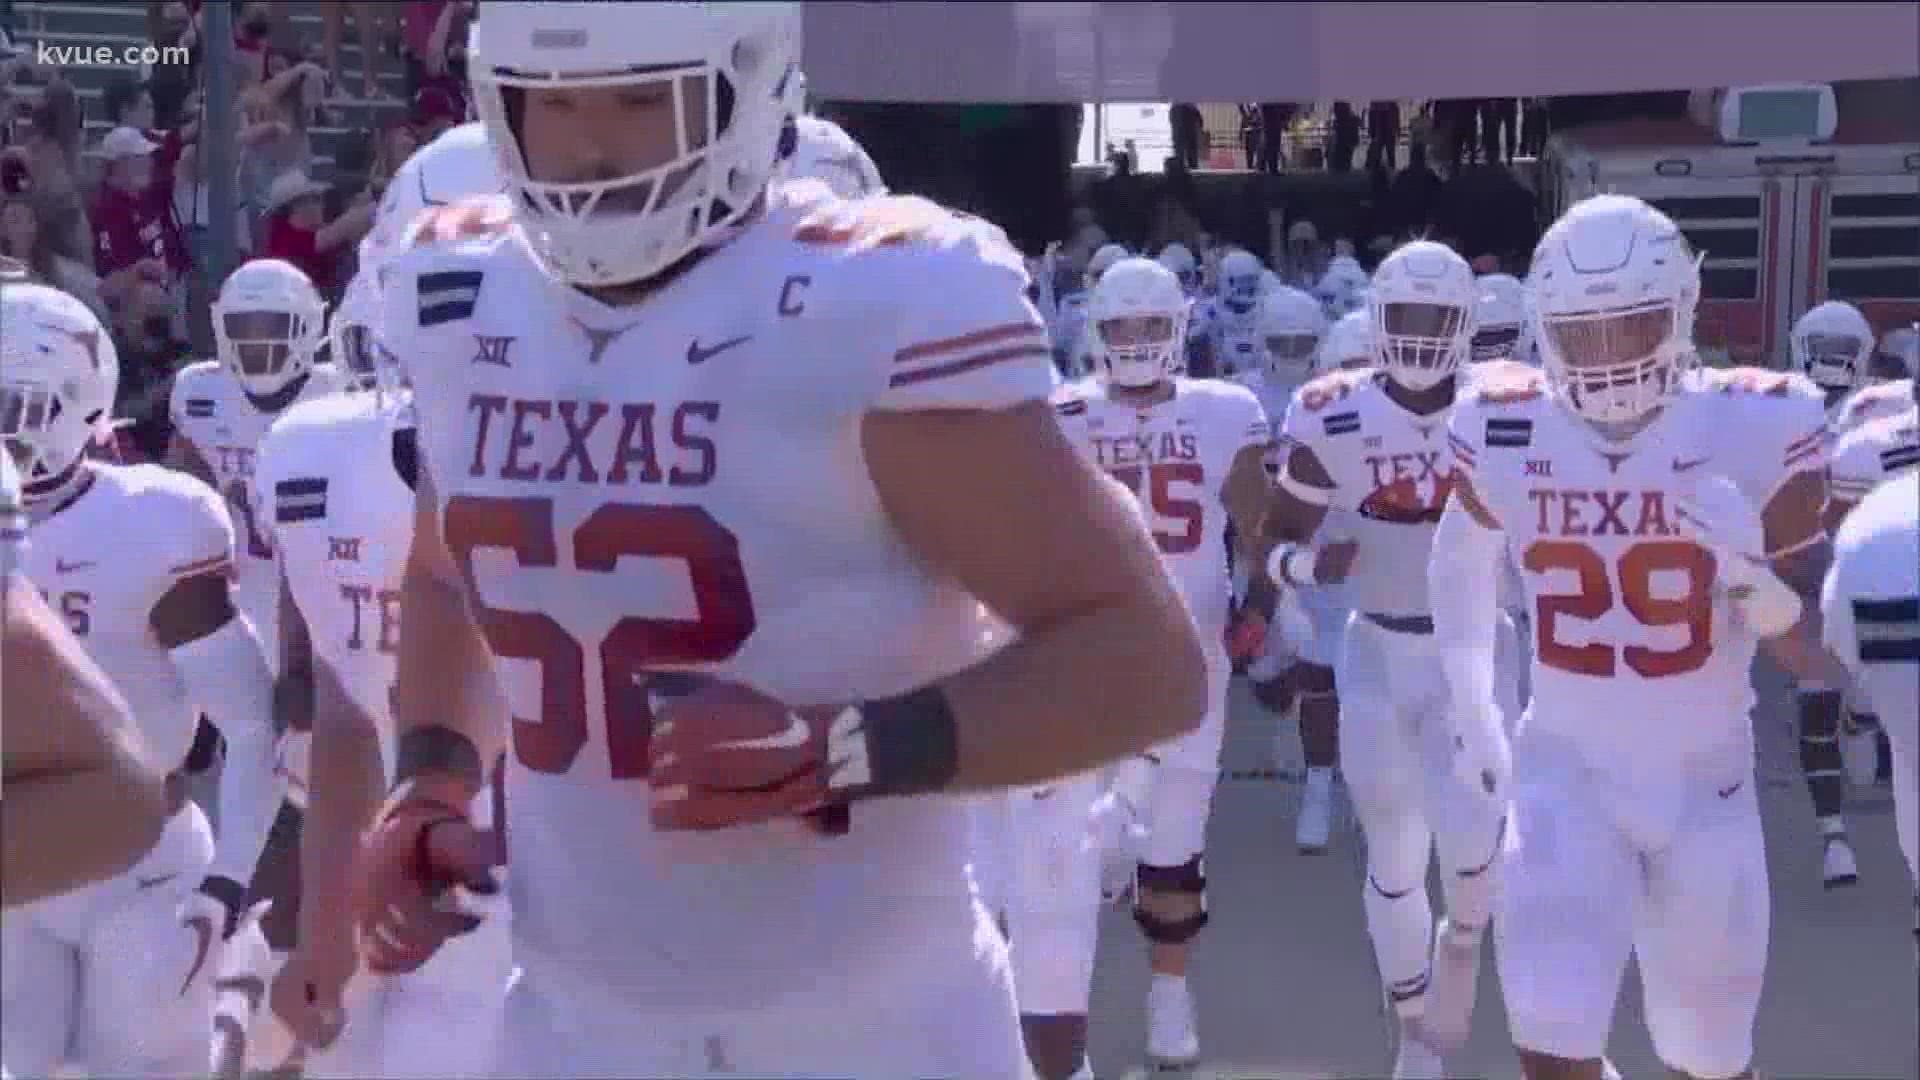 The Longhorns need to turn things around as they prepare to face Iowa State.